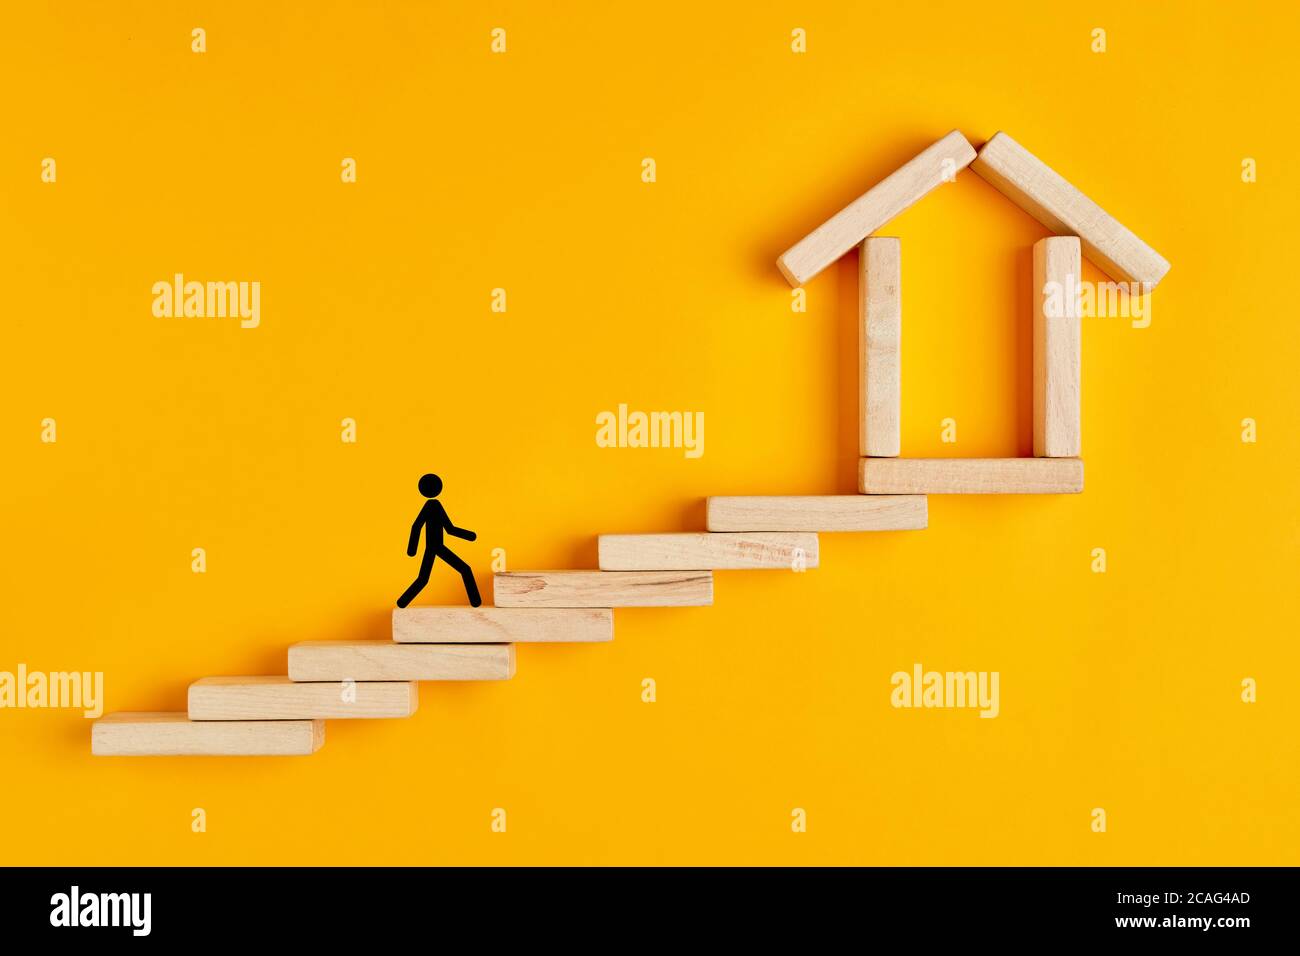 Male stickman climbing the ladders towards home formed by wooden blocks on yellow background. Stock Photo